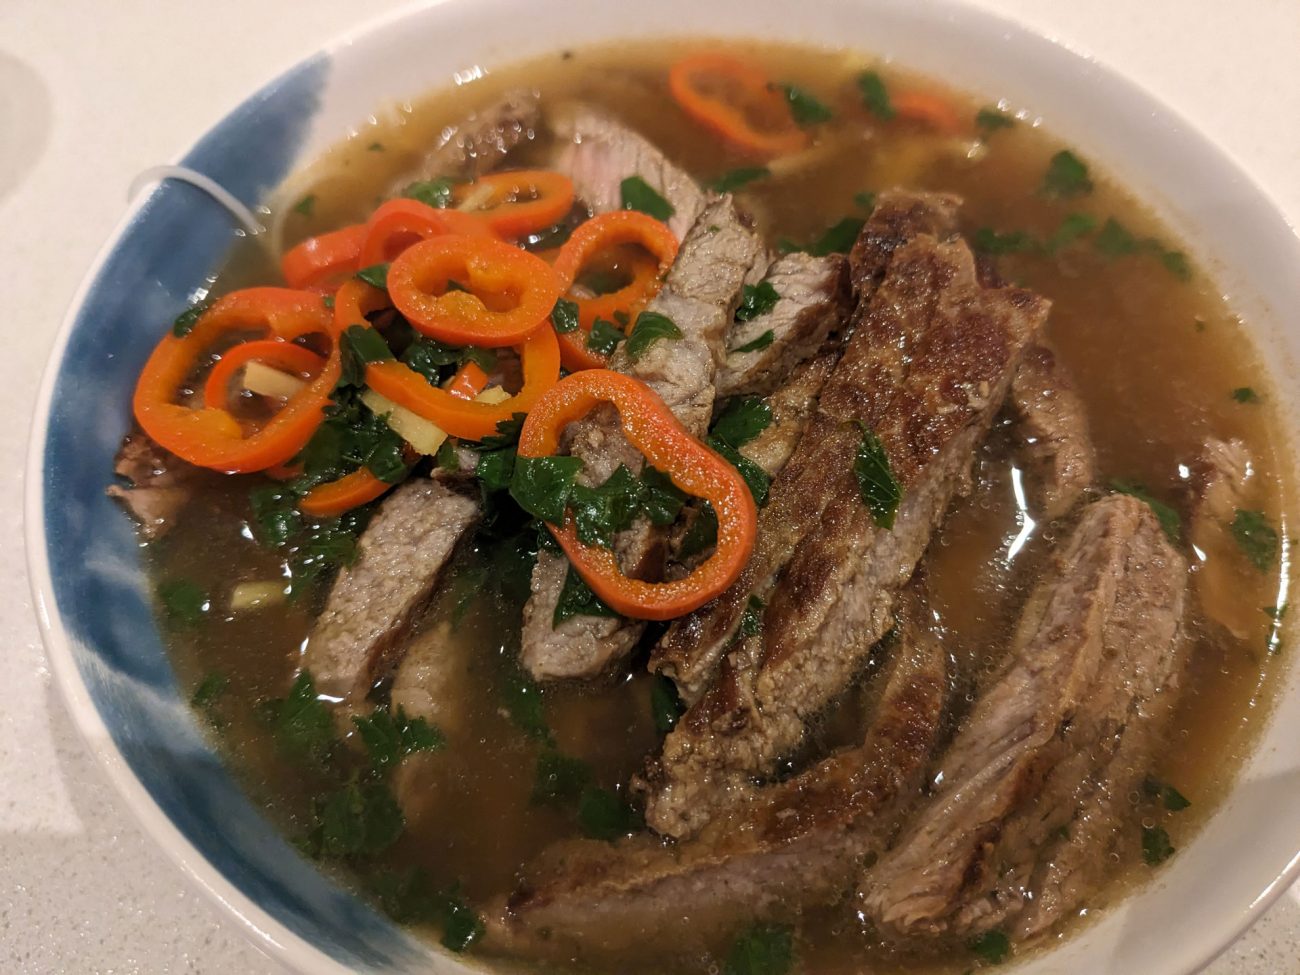 Spicy Thai Noodle Soup with Sliced Aberdeen Angus Steak